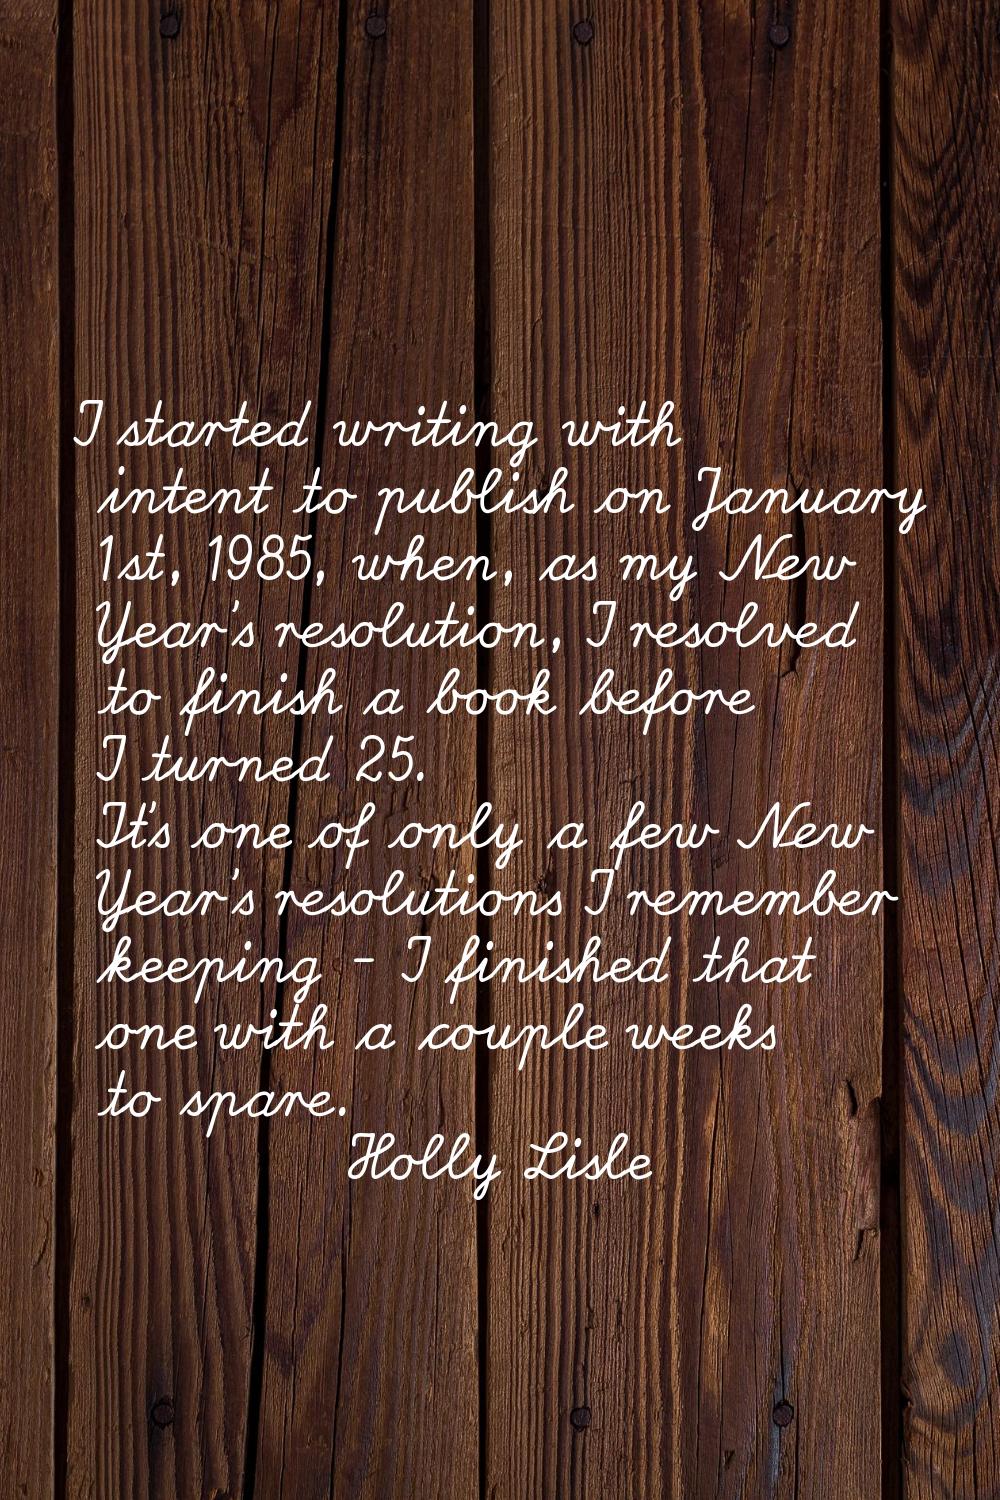 I started writing with intent to publish on January 1st, 1985, when, as my New Year's resolution, I